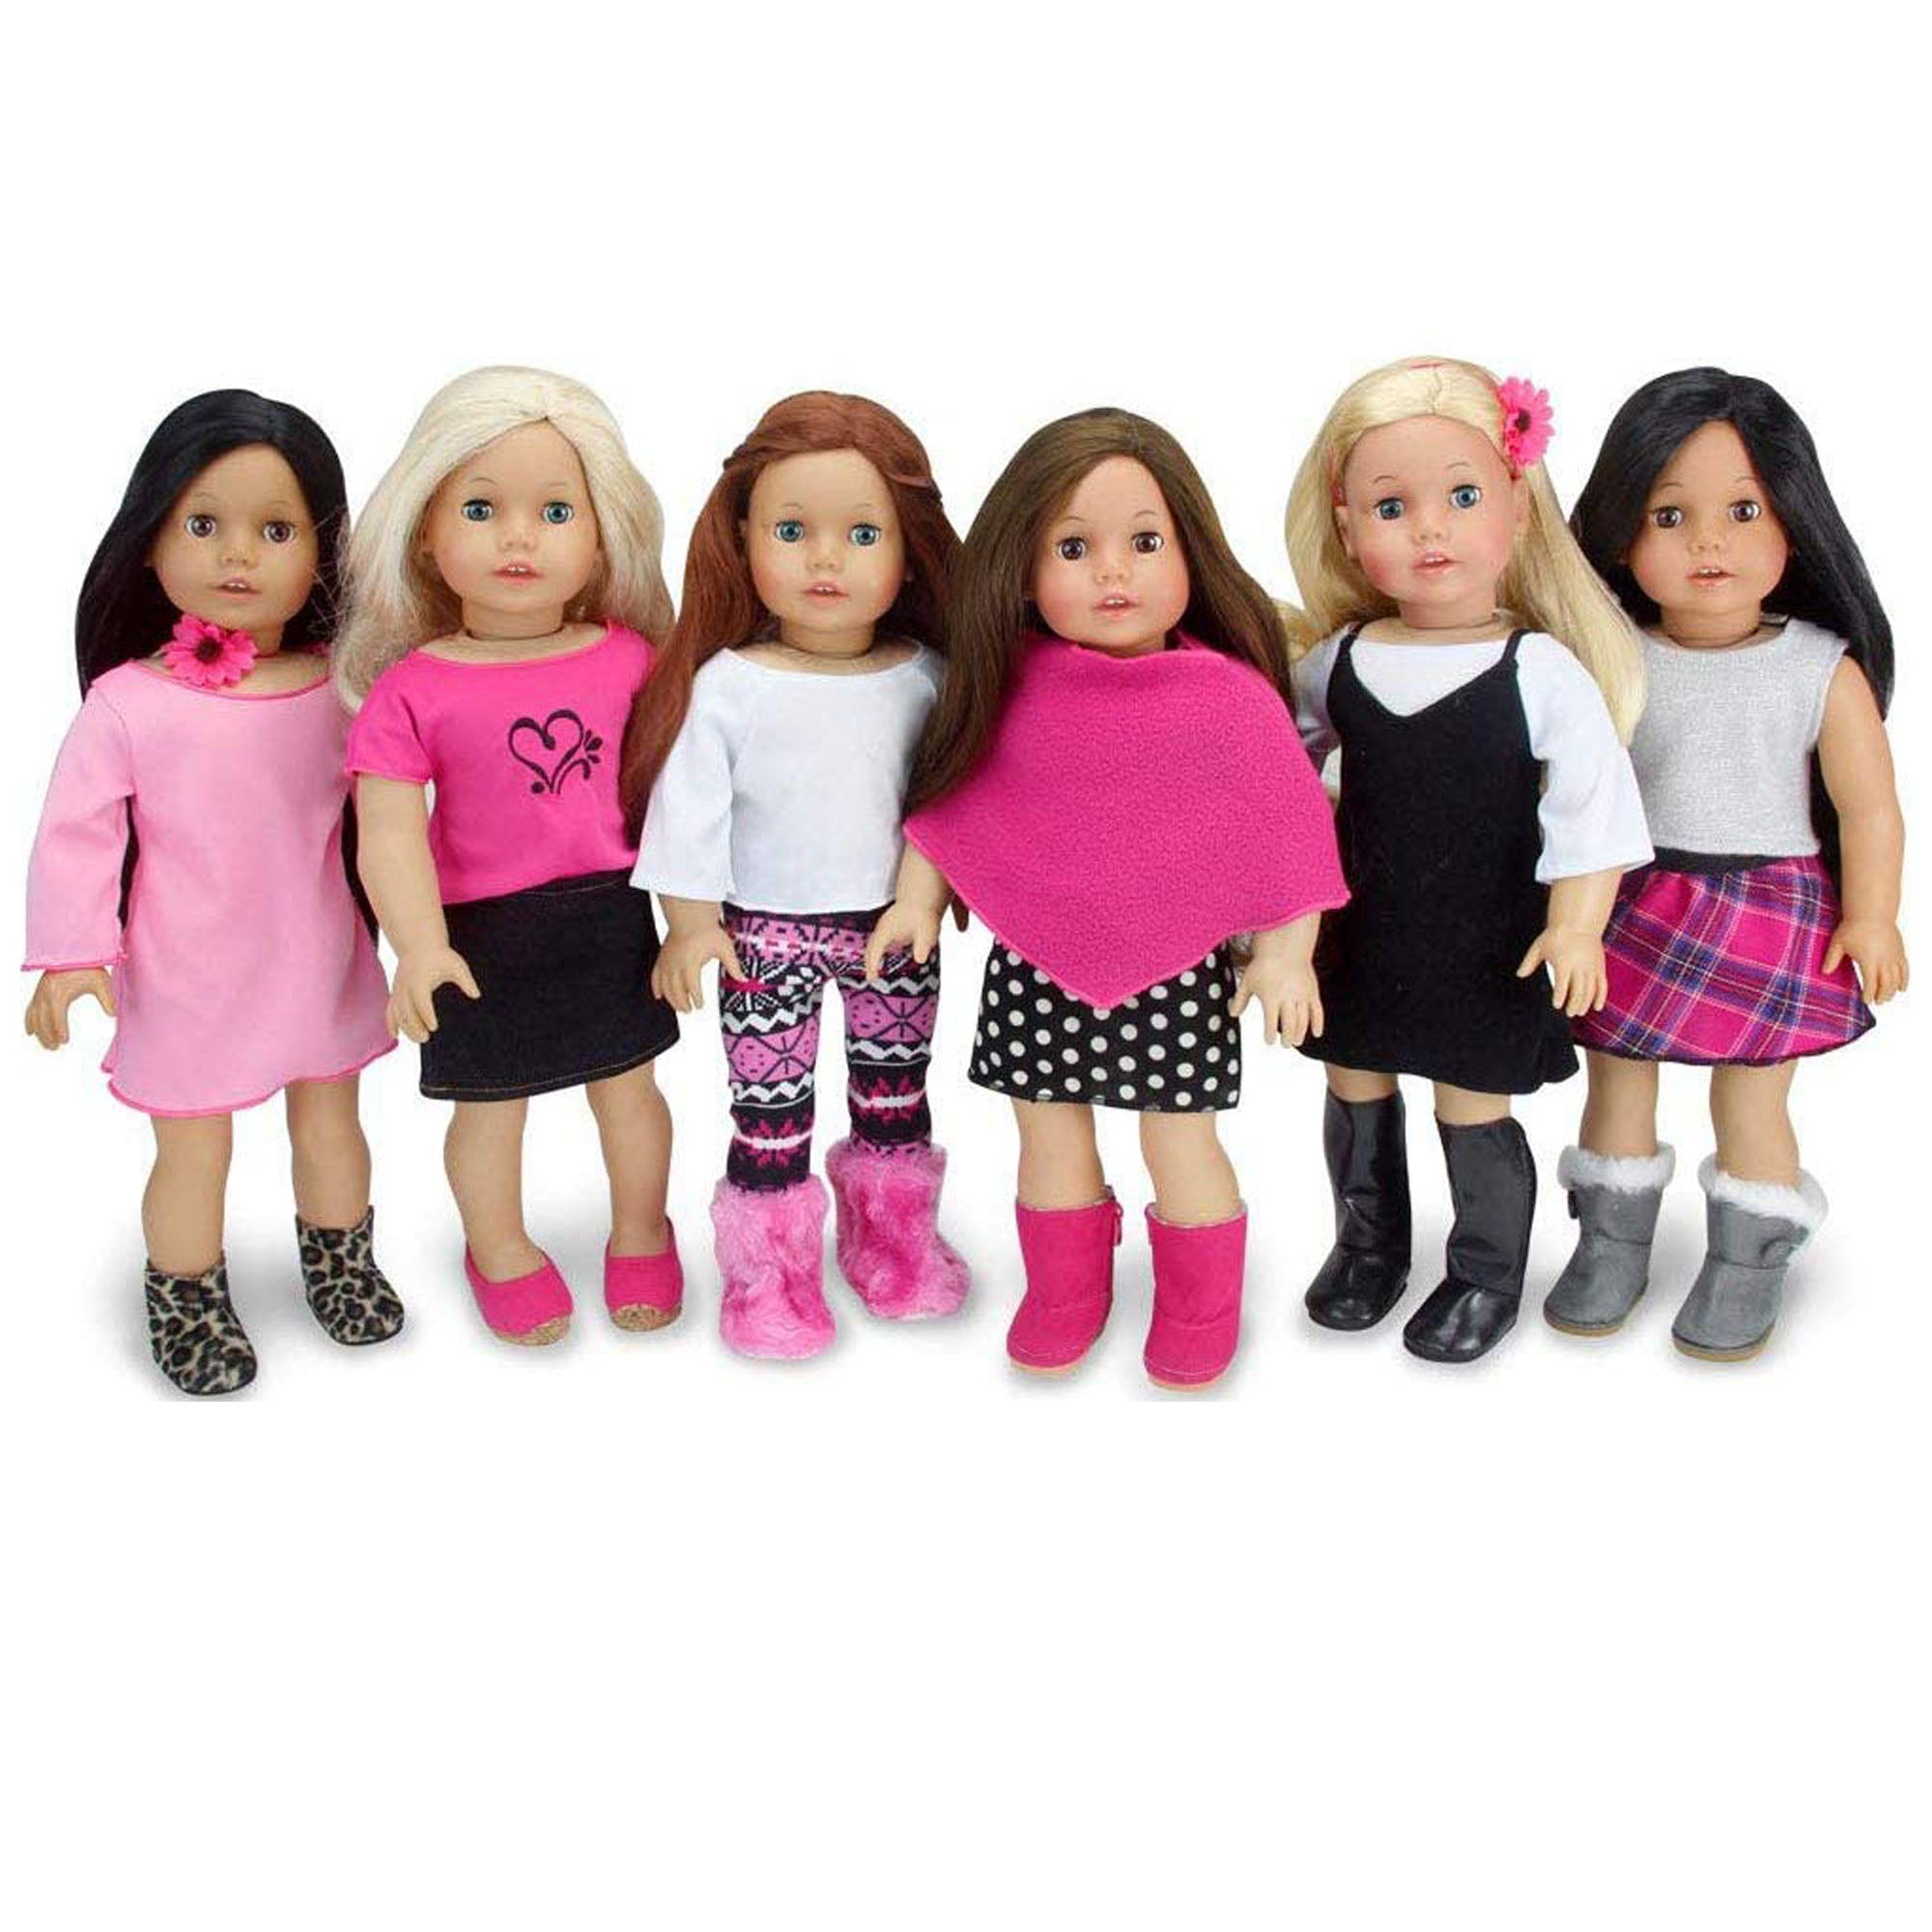 PZAS Toys 18 Inch Doll Underwear - 10 Pairs of Underwear, Compatible with  American Girl Doll Clothes and Accessories